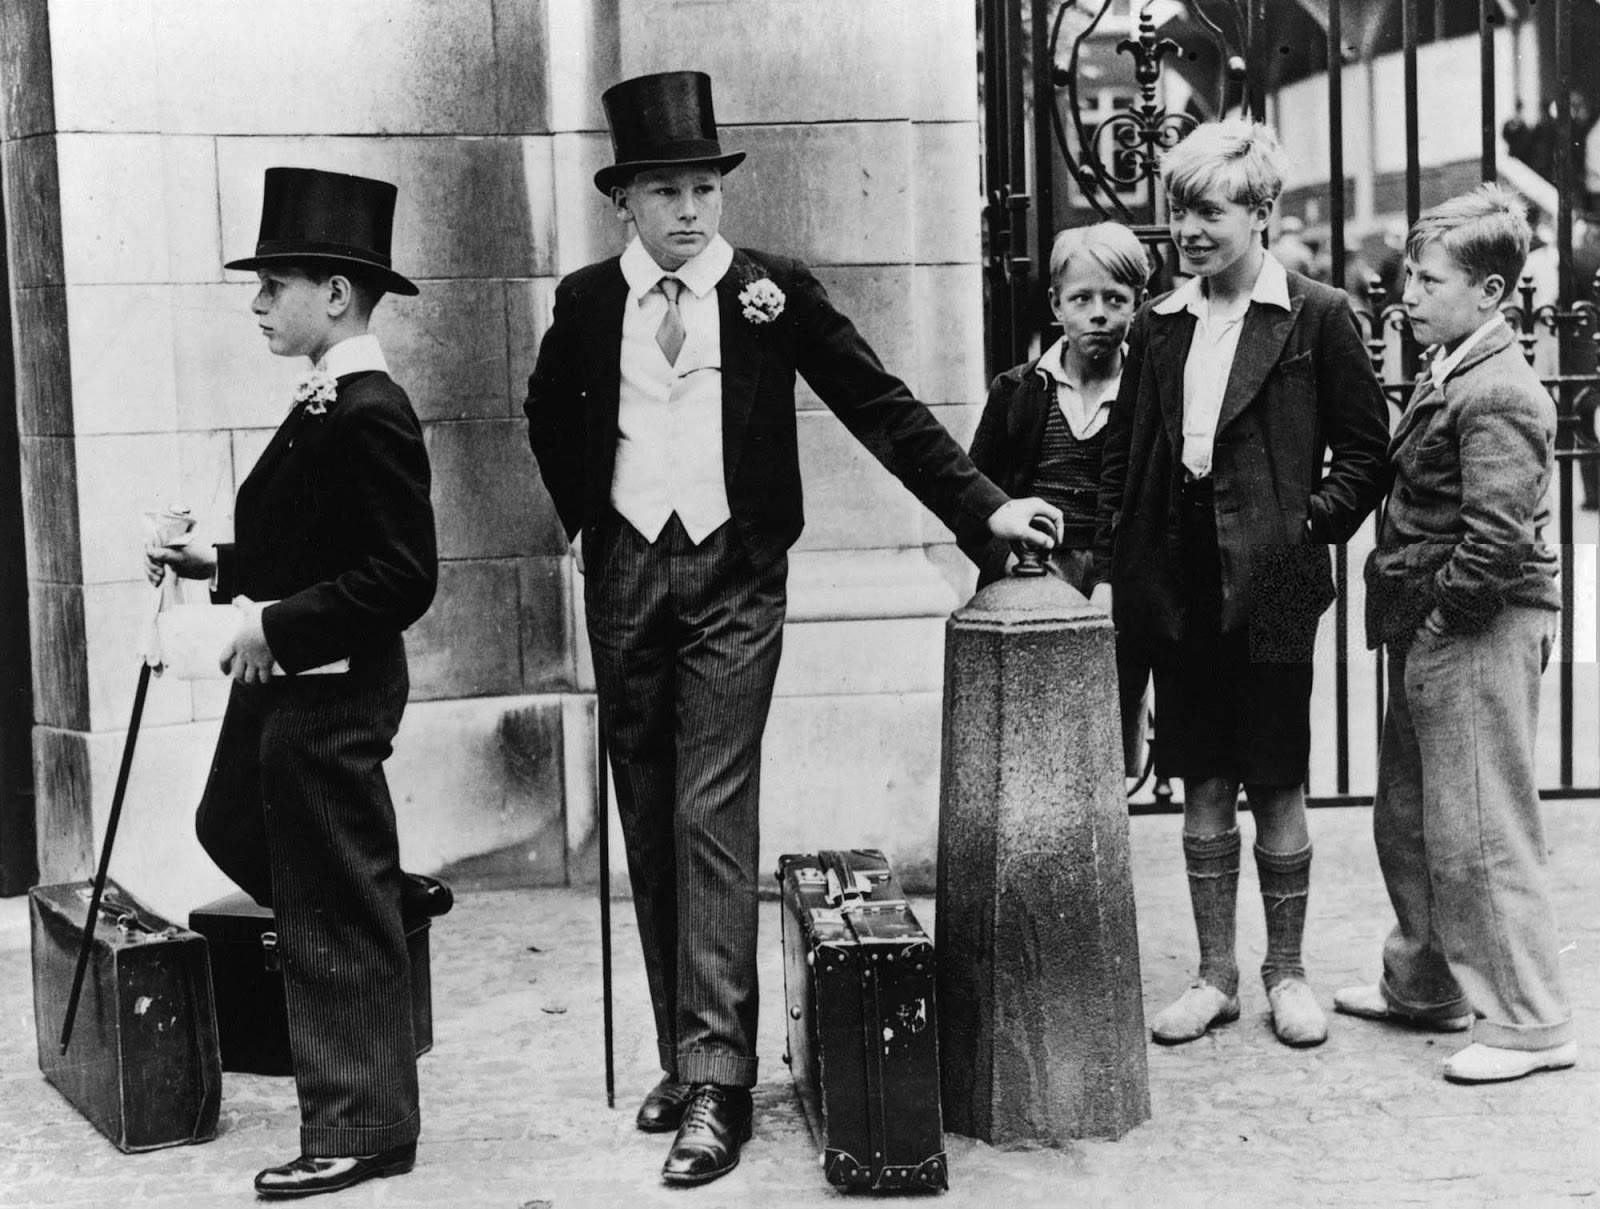 The five boys who came to illustrate the class divide of pre-war Britain, 1937